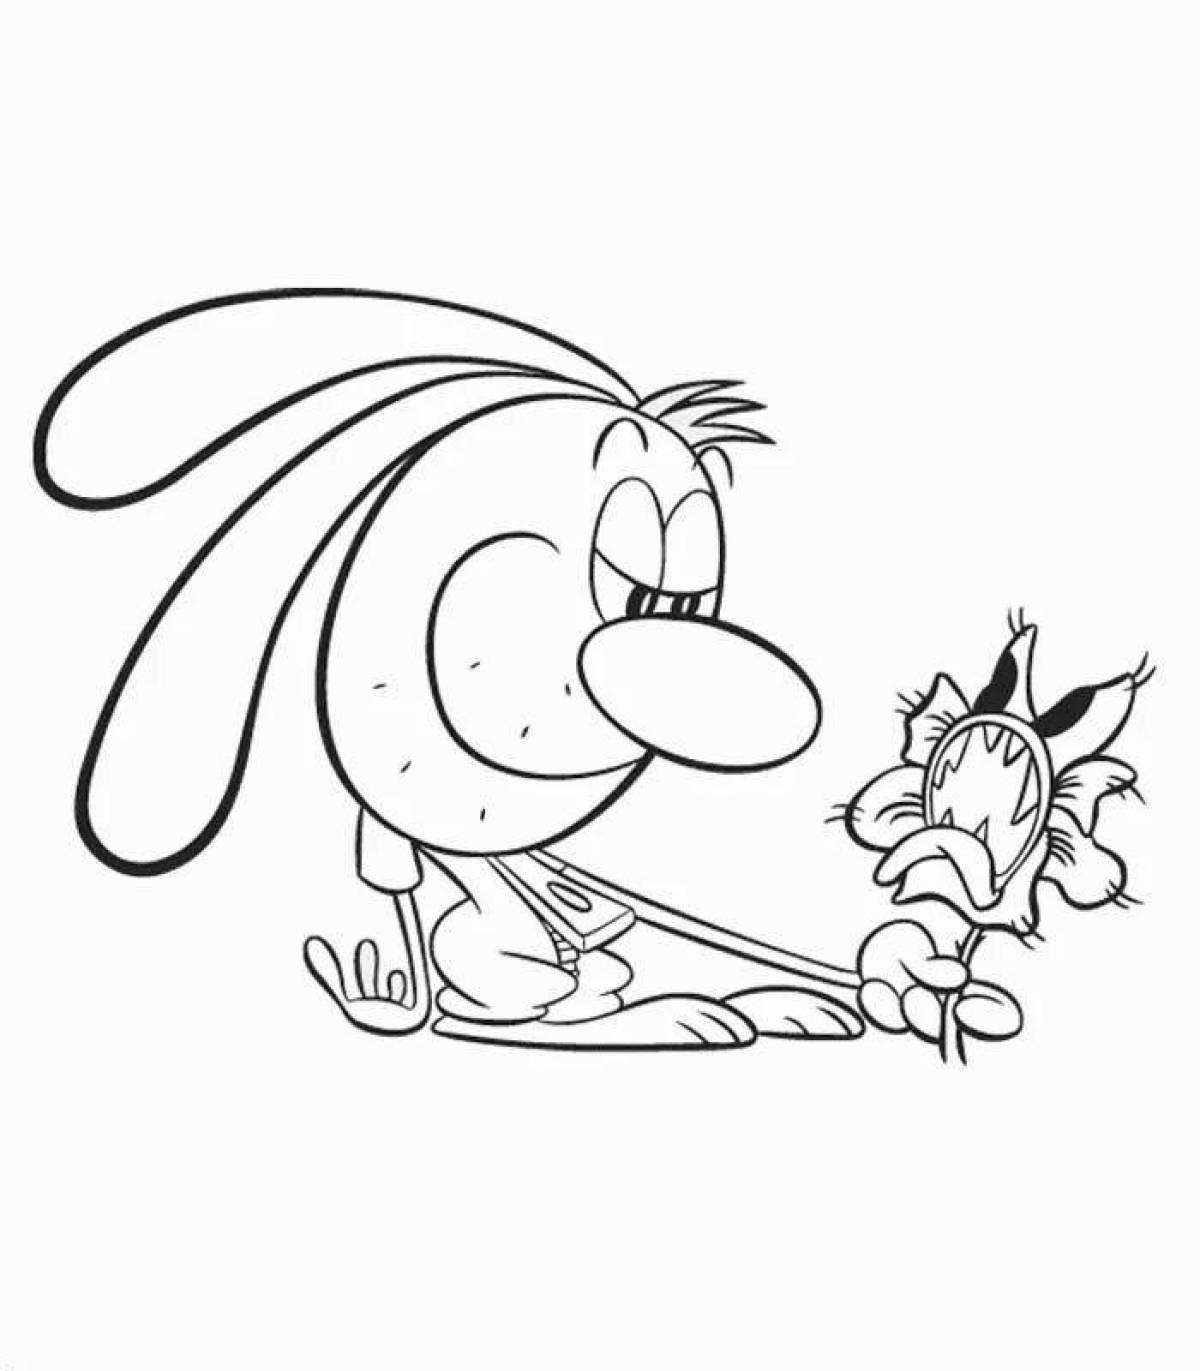 Coloring-fascinations coloring page com